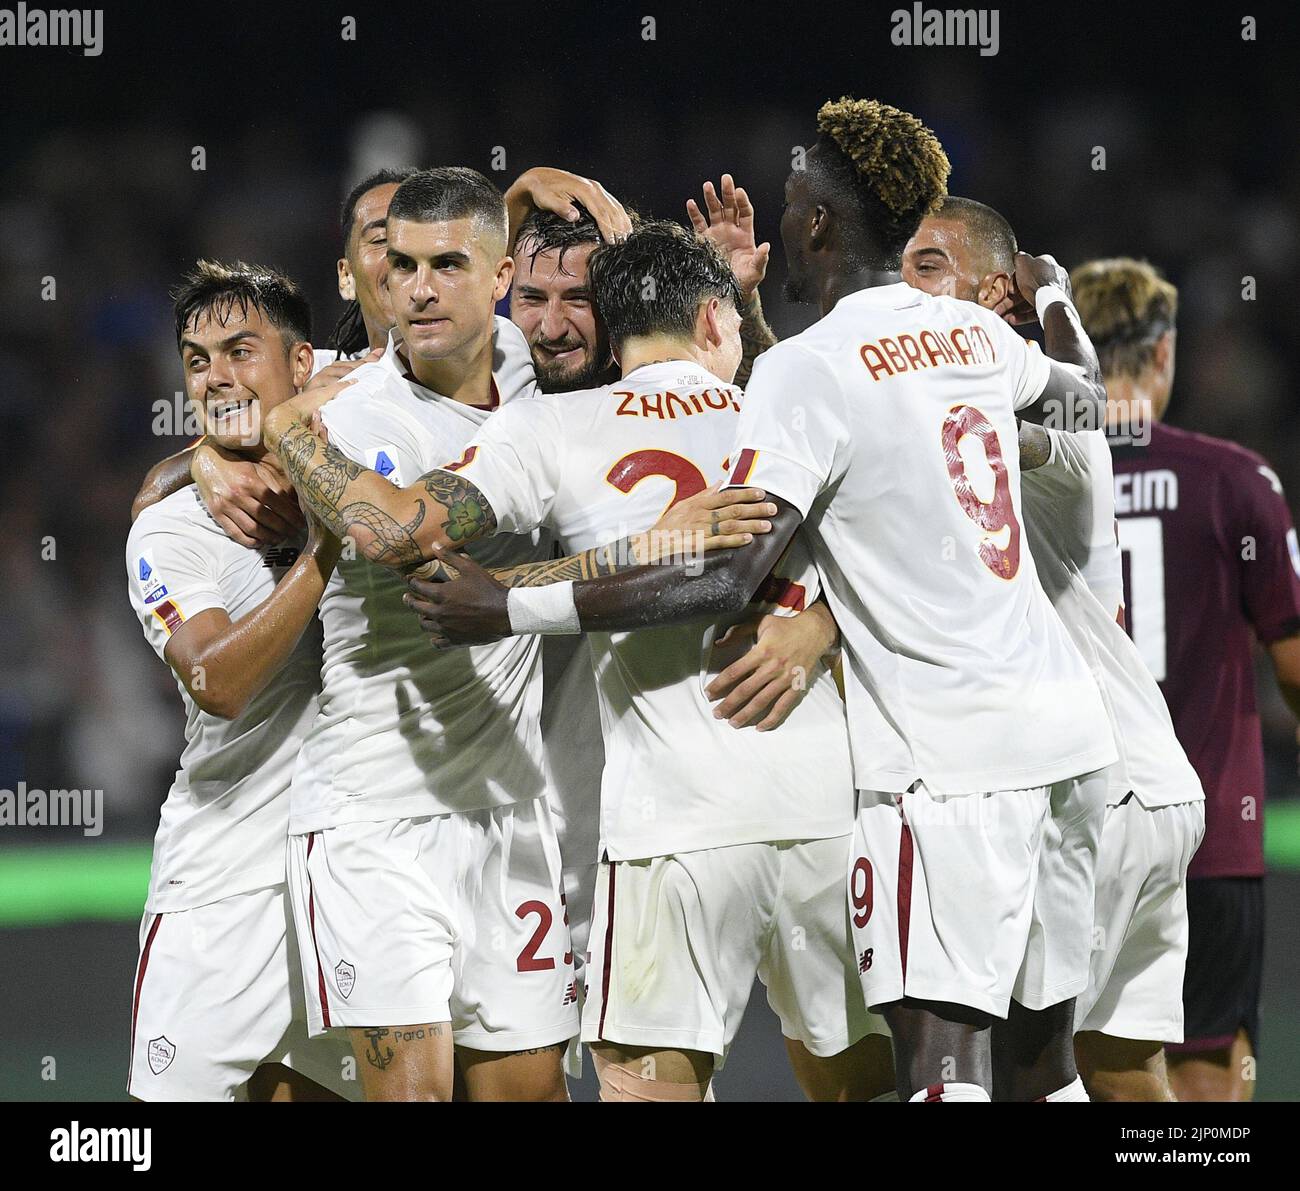 Salerno, Italy. 14th Aug, 2022. Roma's Bryan Cristante (4th, L) celebrates his goal with his teammates during a Serie A football match between Roma and Salernitana in Salerno, Italy, on Aug. 14, 2022. Credit: Str/Xinhua/Alamy Live News Stock Photo